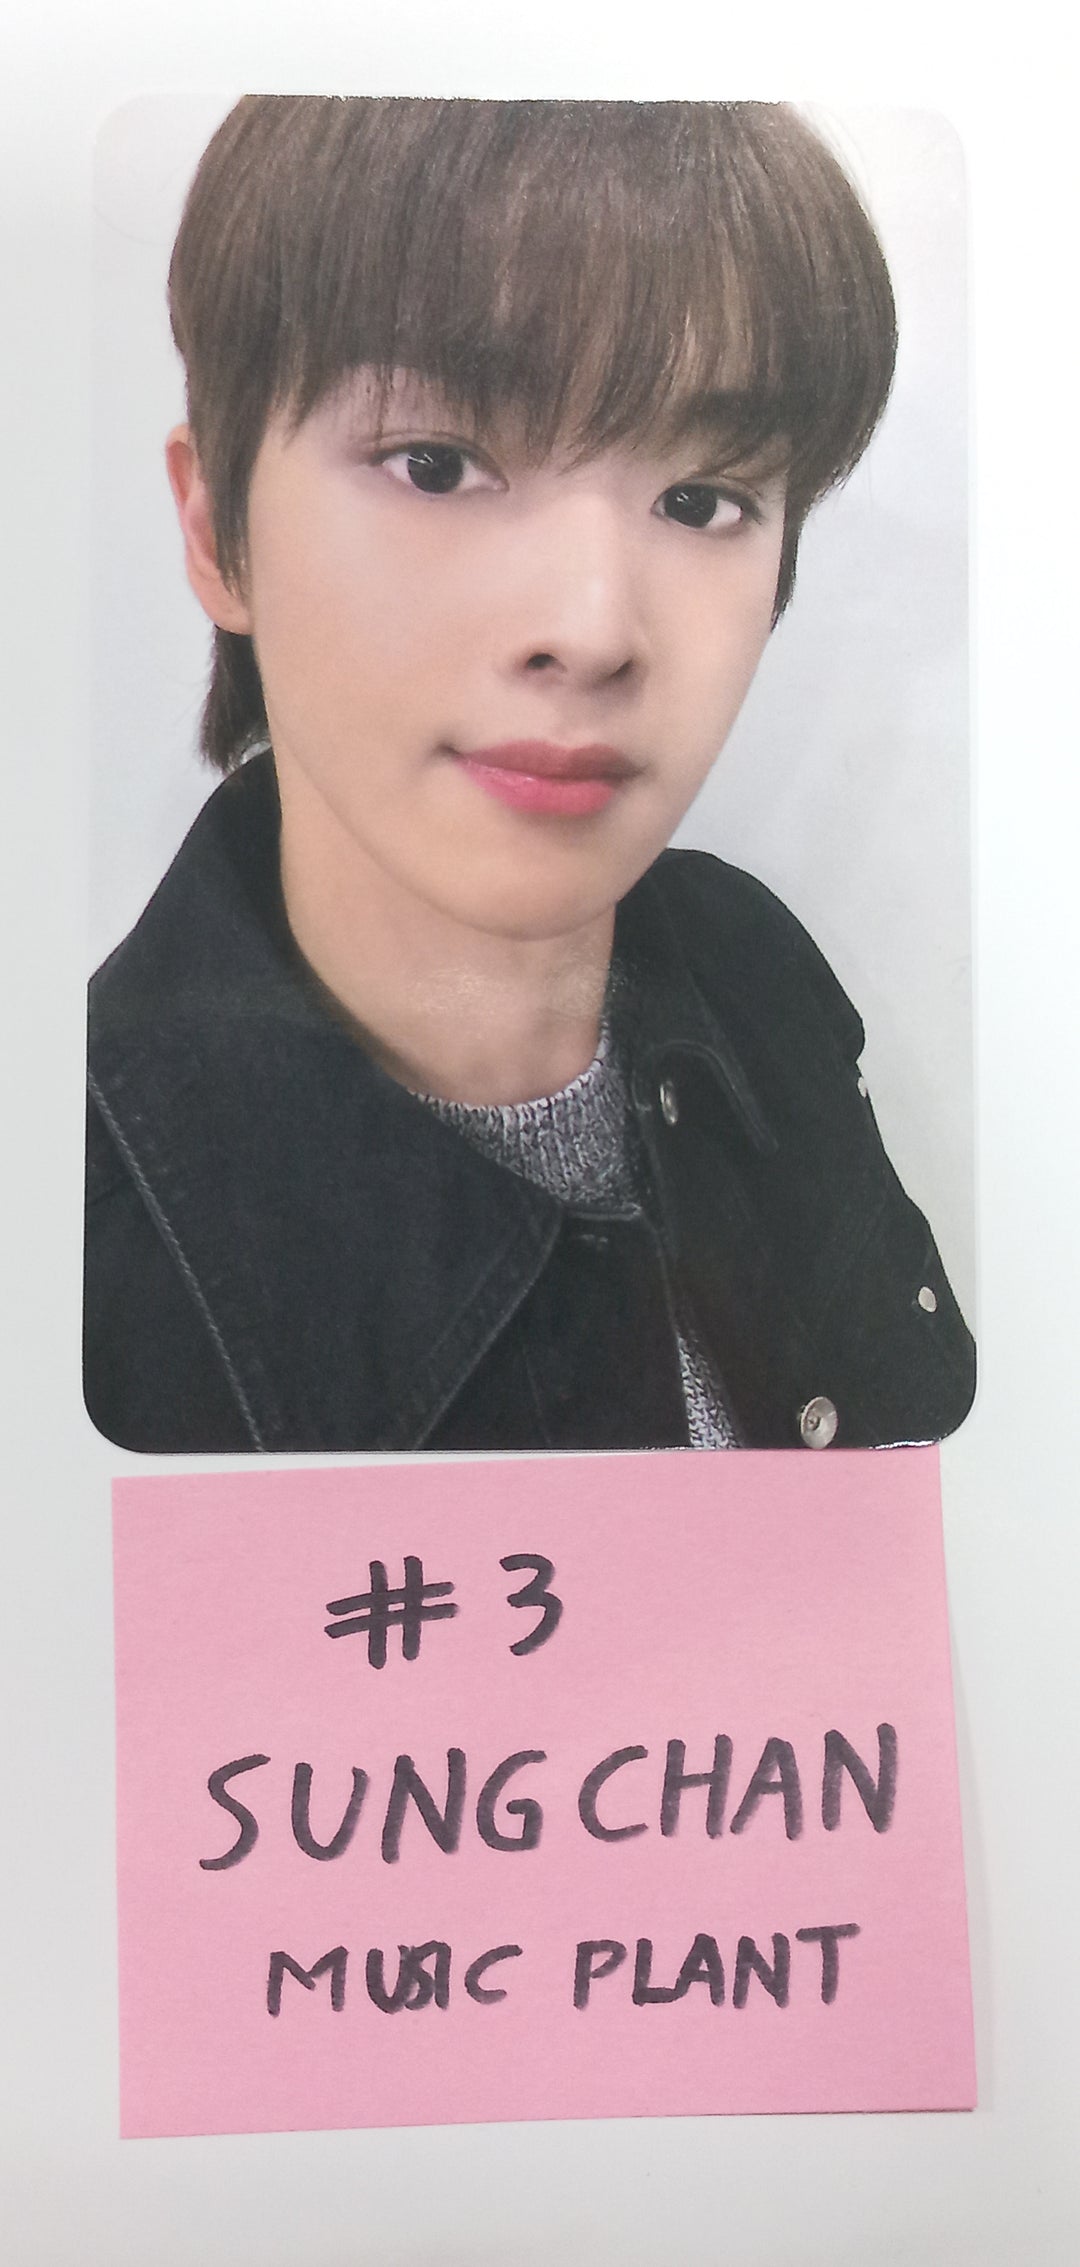 RIIZE "Get A Guitar" - Music Plant Fansign Event Photocard [23.12.08]